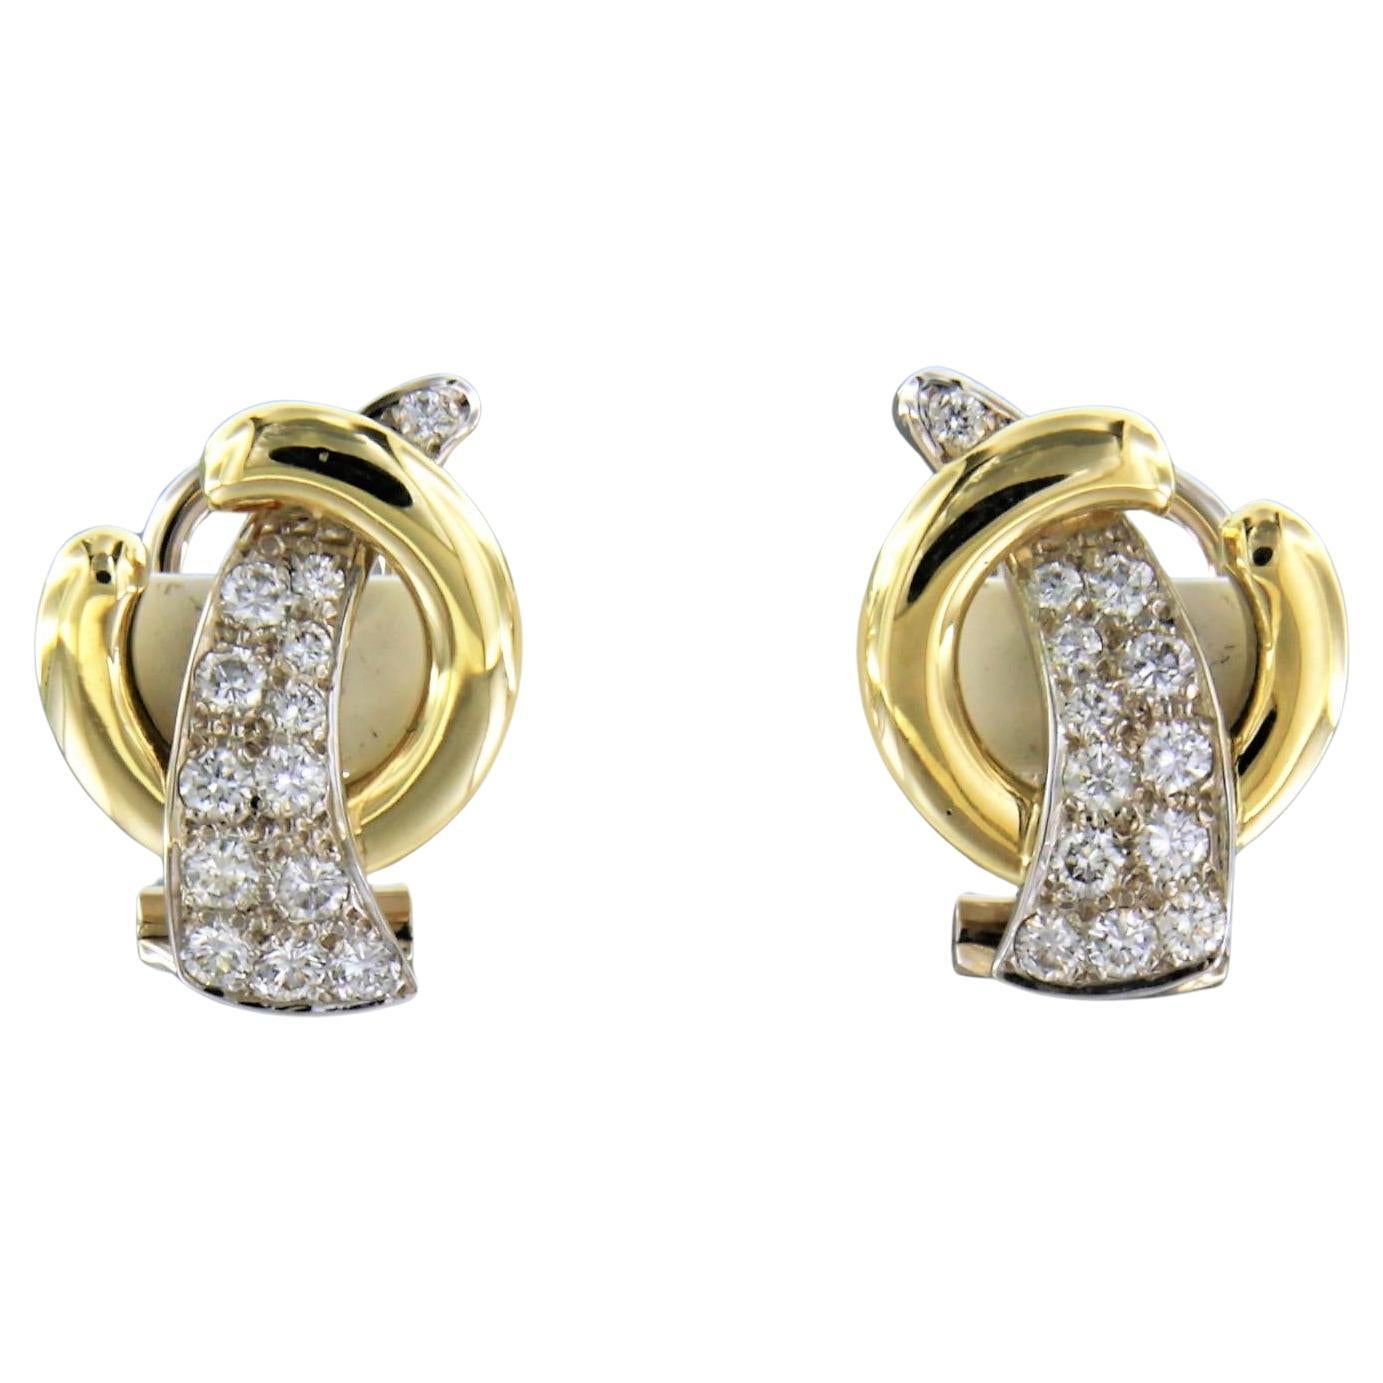 Earrings set with diamonds 14kt bicolour gold